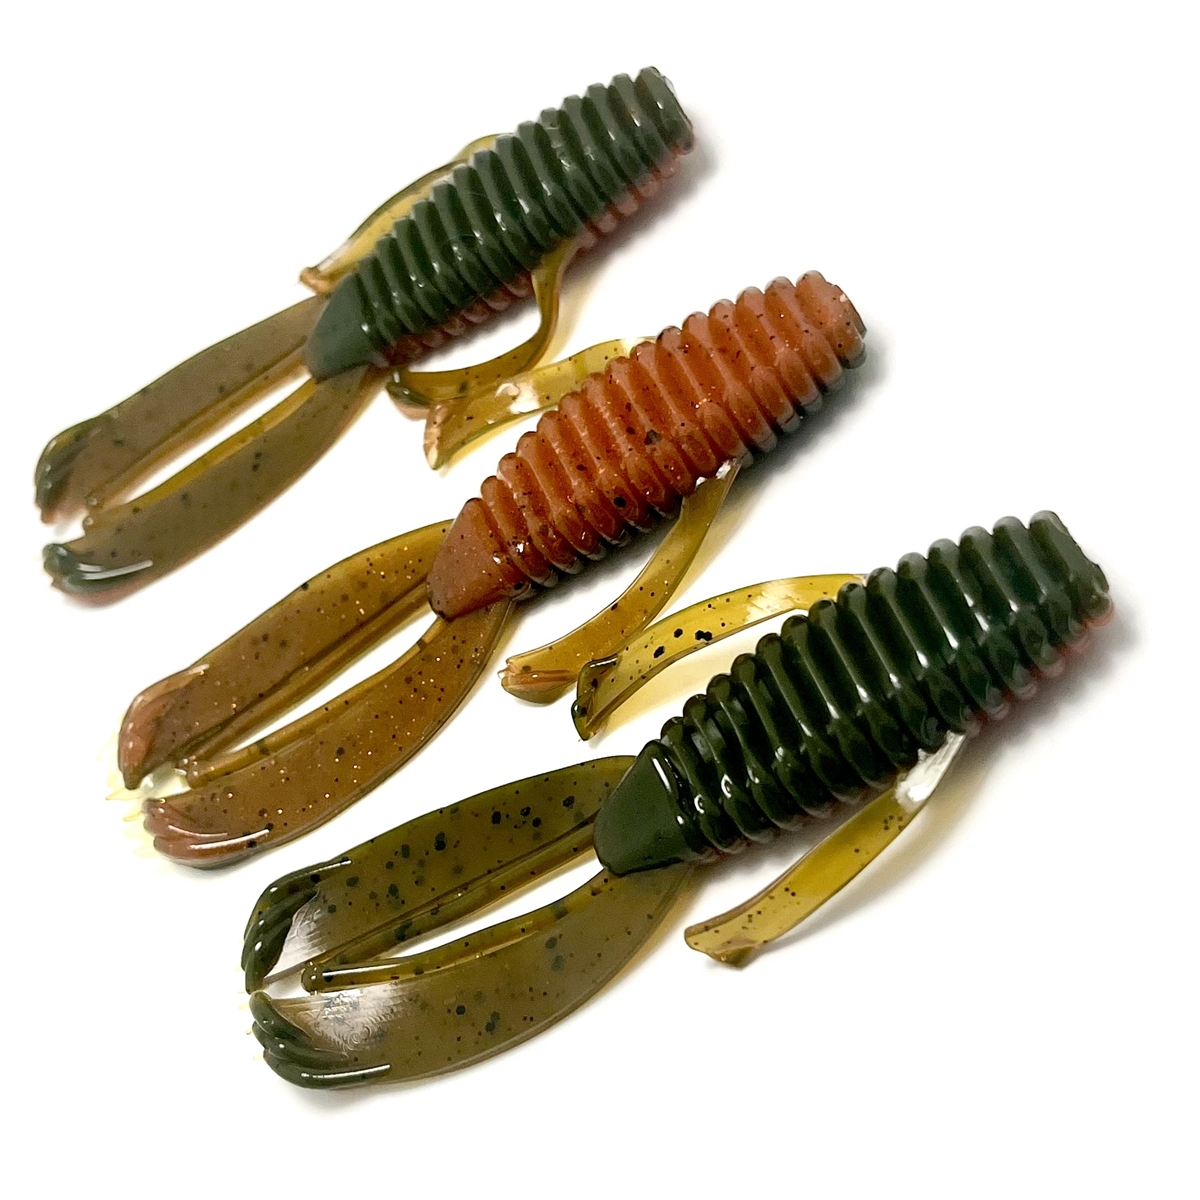 Ragin Cajun is a two toned bait which we take great pride in producing with  the highest of quality and product inspection prior to packaging. The Senko  style Assault worm is 5.25